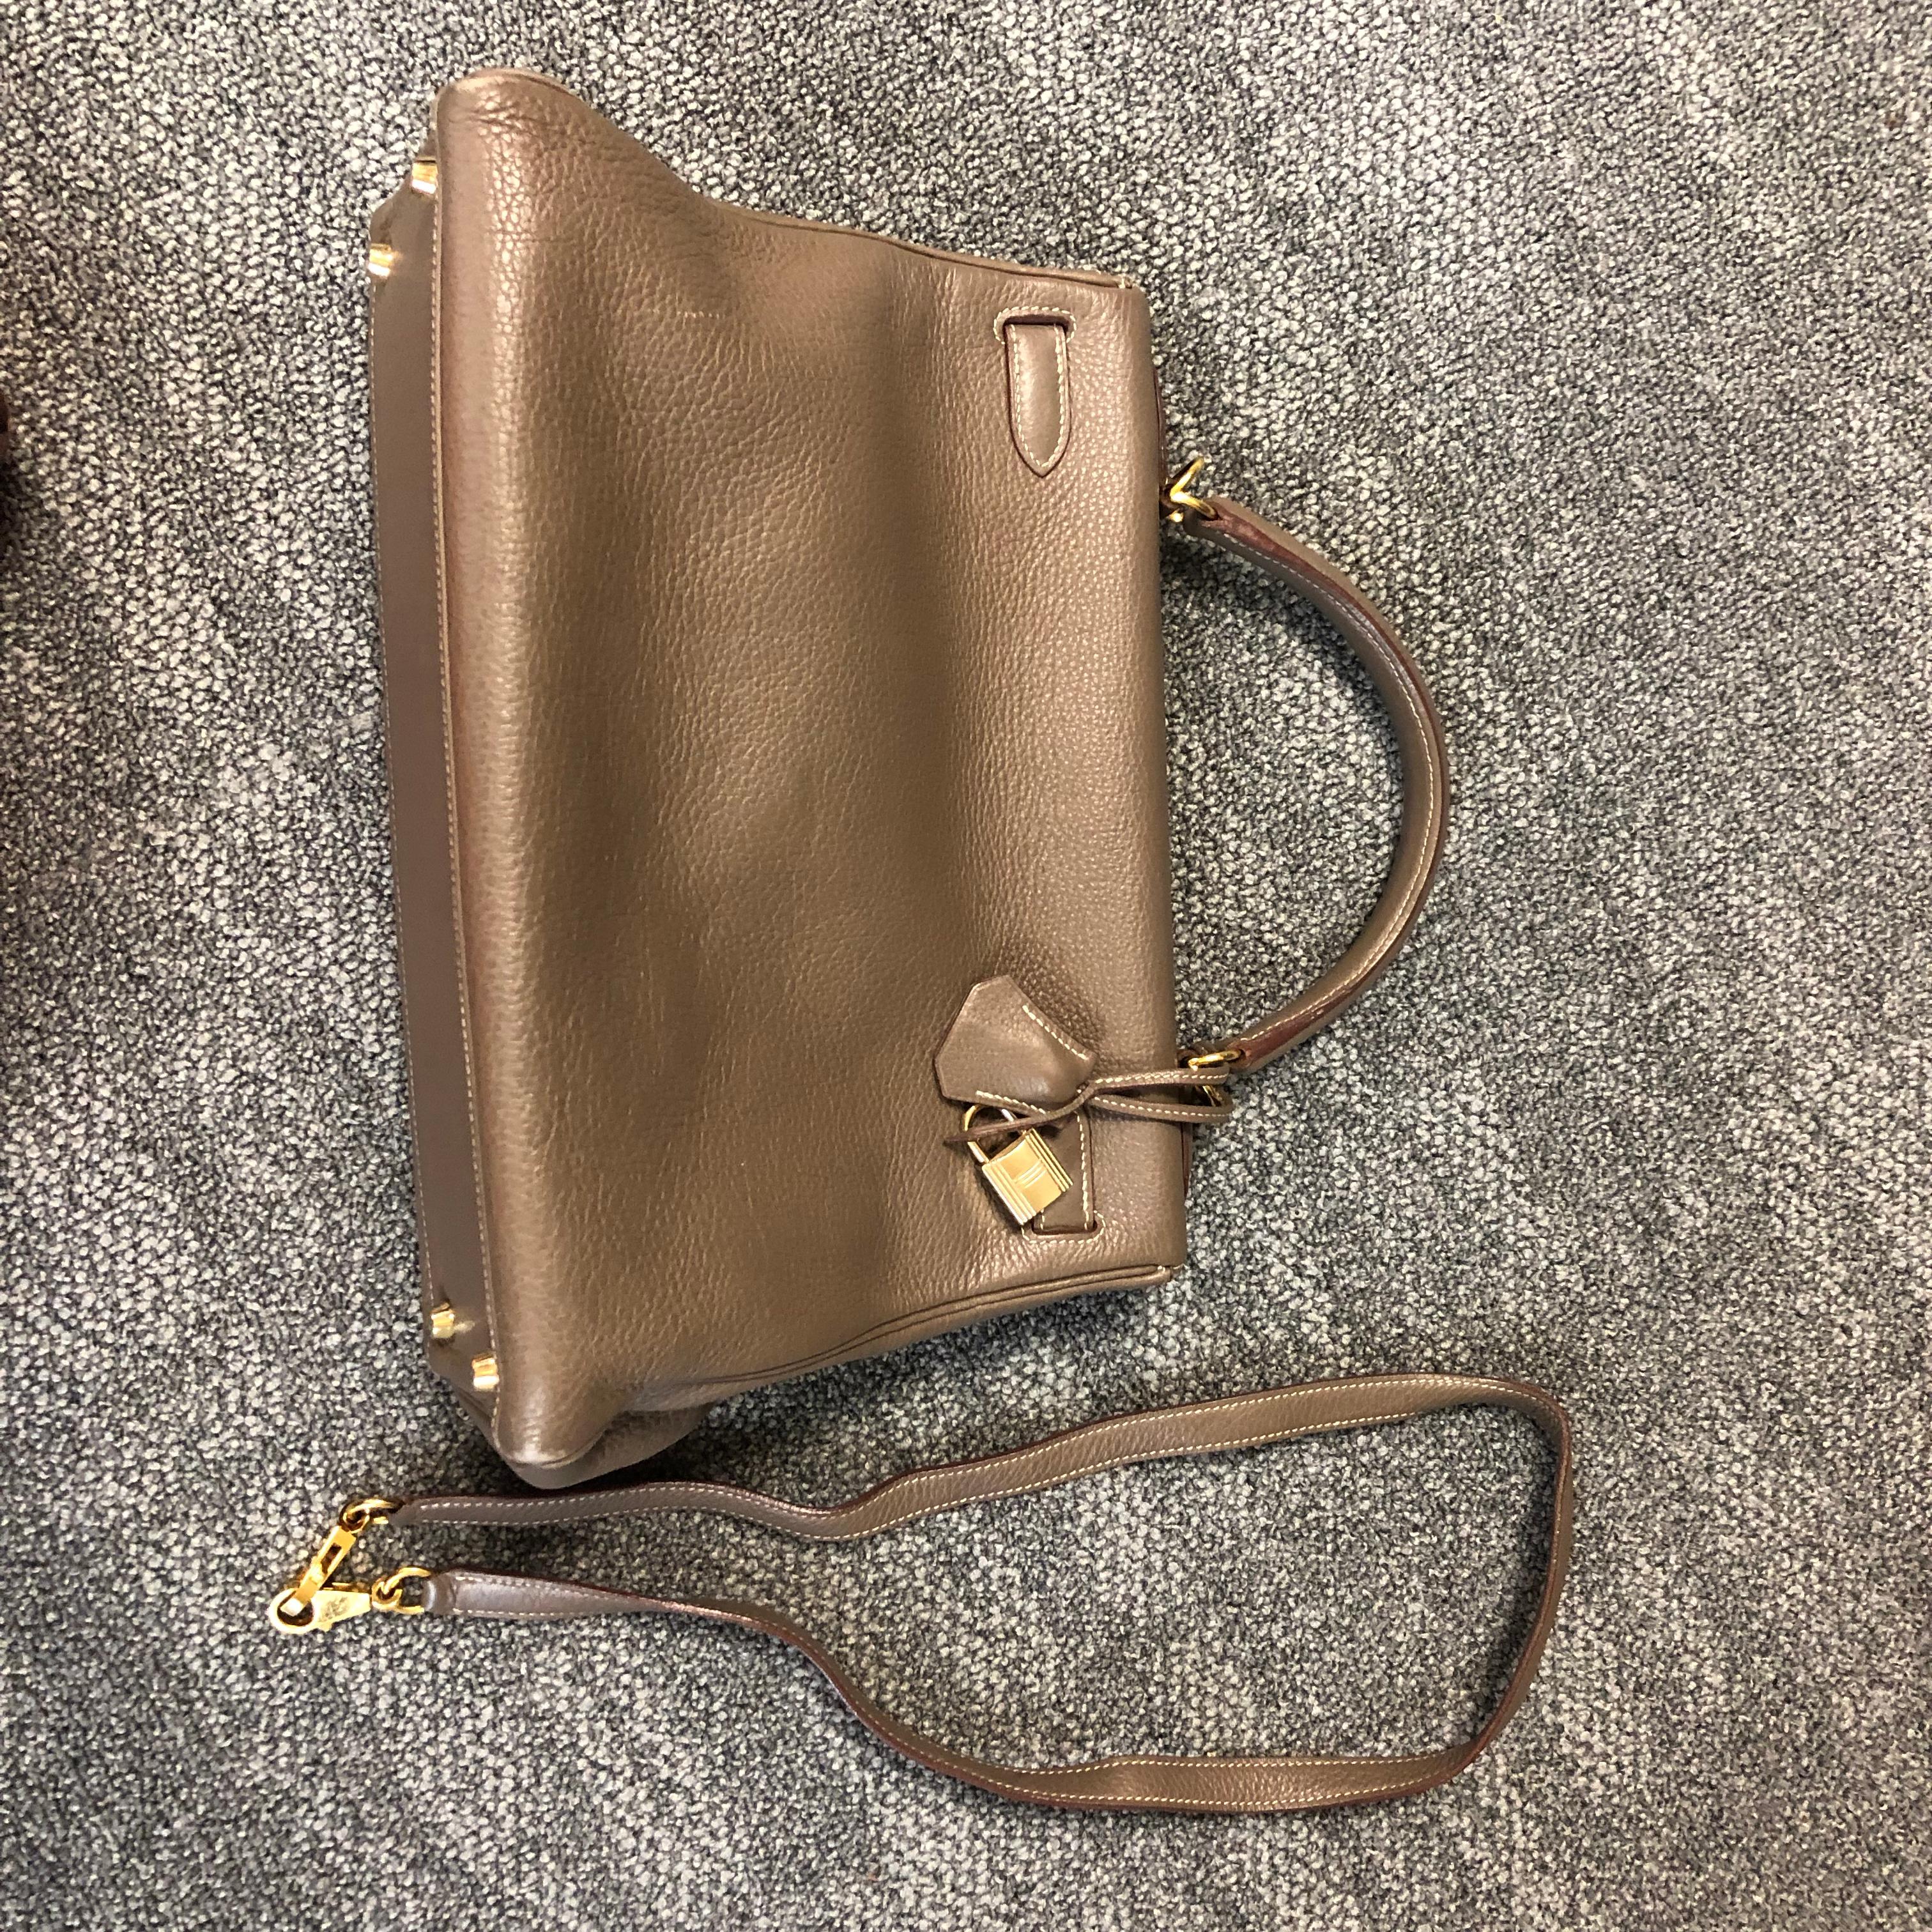 Hermès Taupe Epsom Leather Kelly Sellier 32 Bag Excellent Condition, 2005 For Sale 1